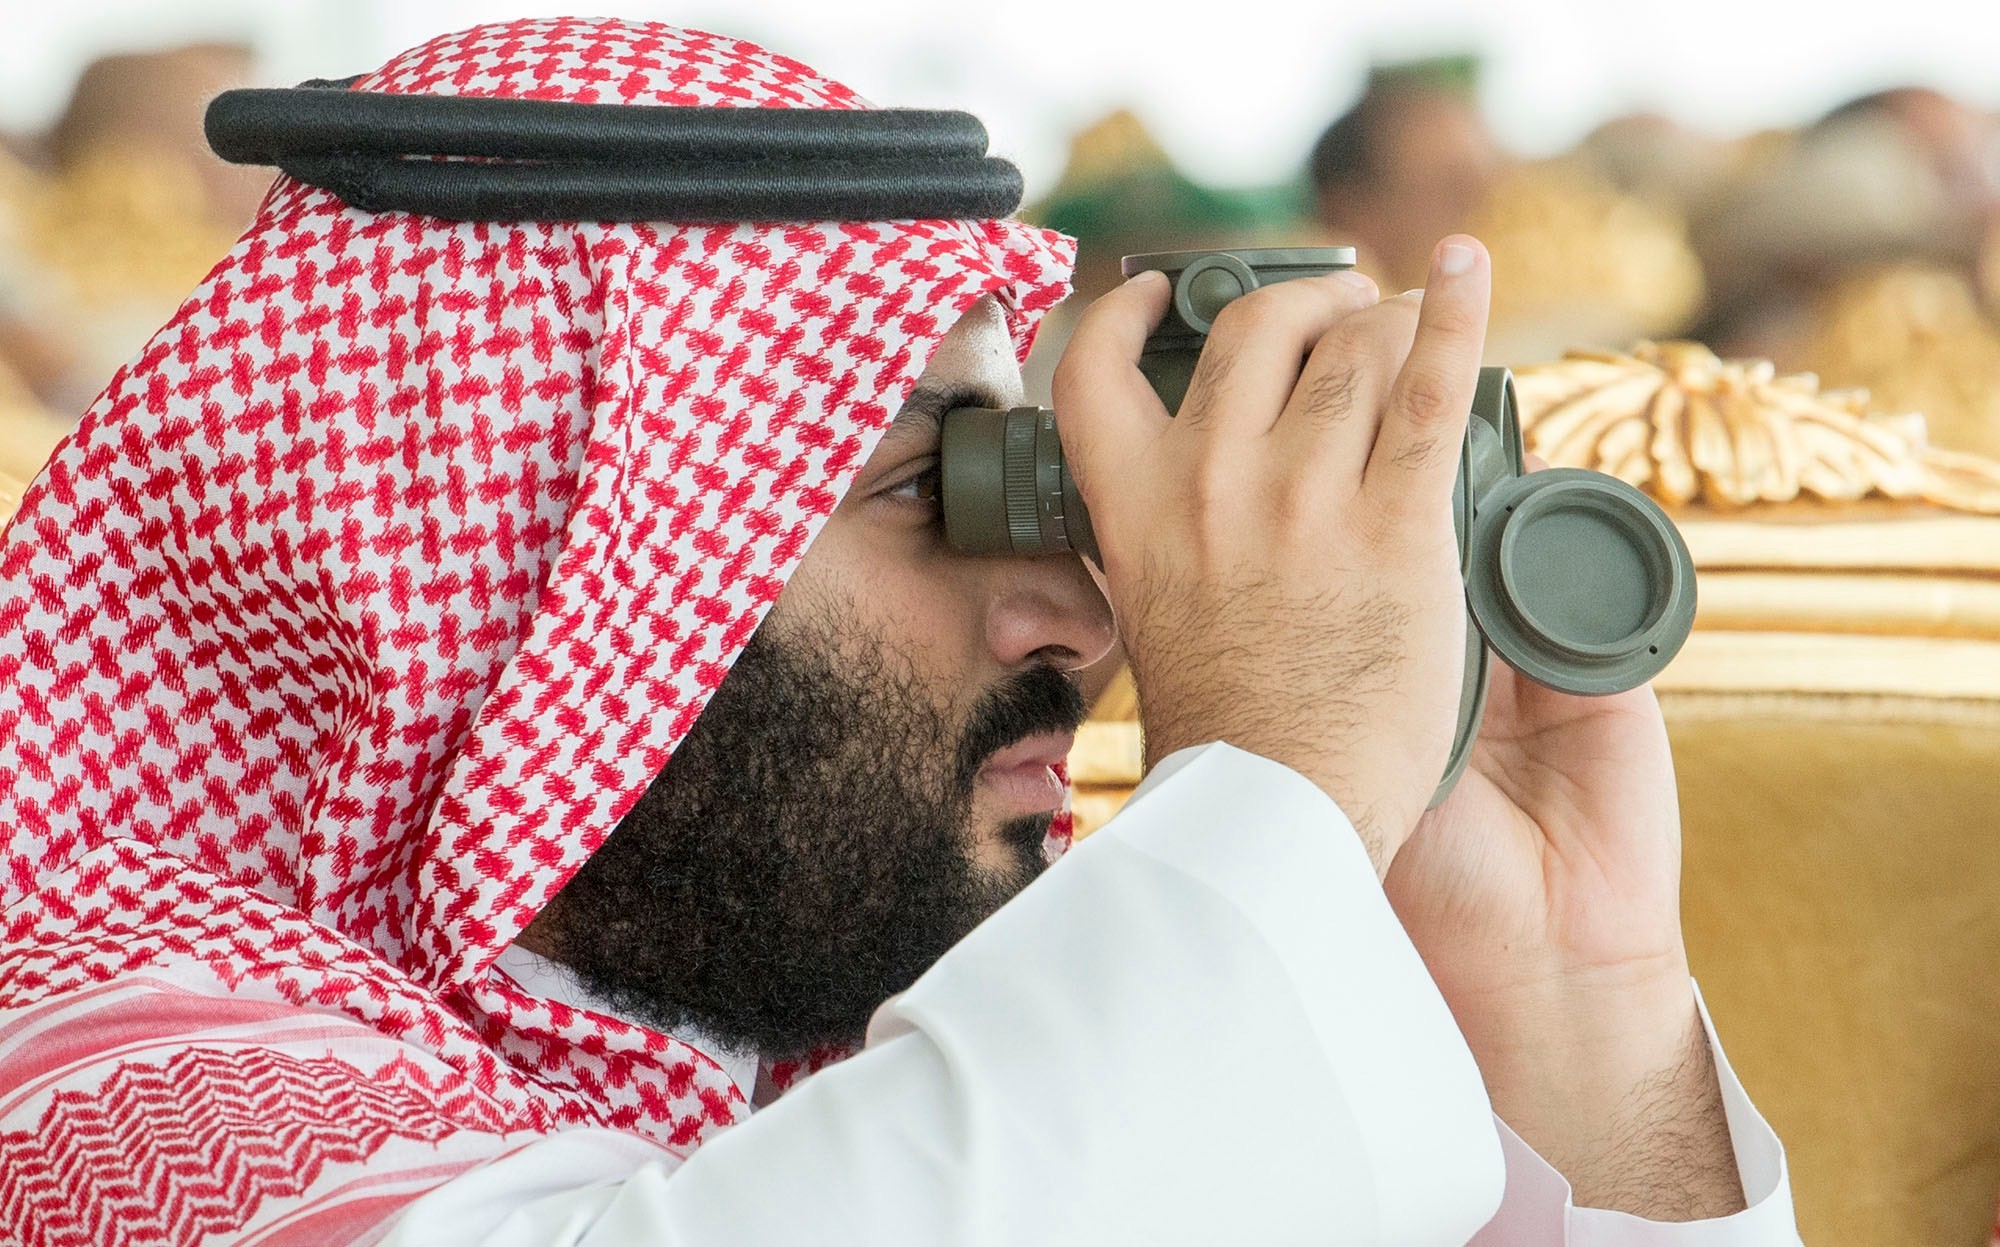 Mohammed MBS Bin Salman observing military exercise Joint Gulf Shielf April 2018